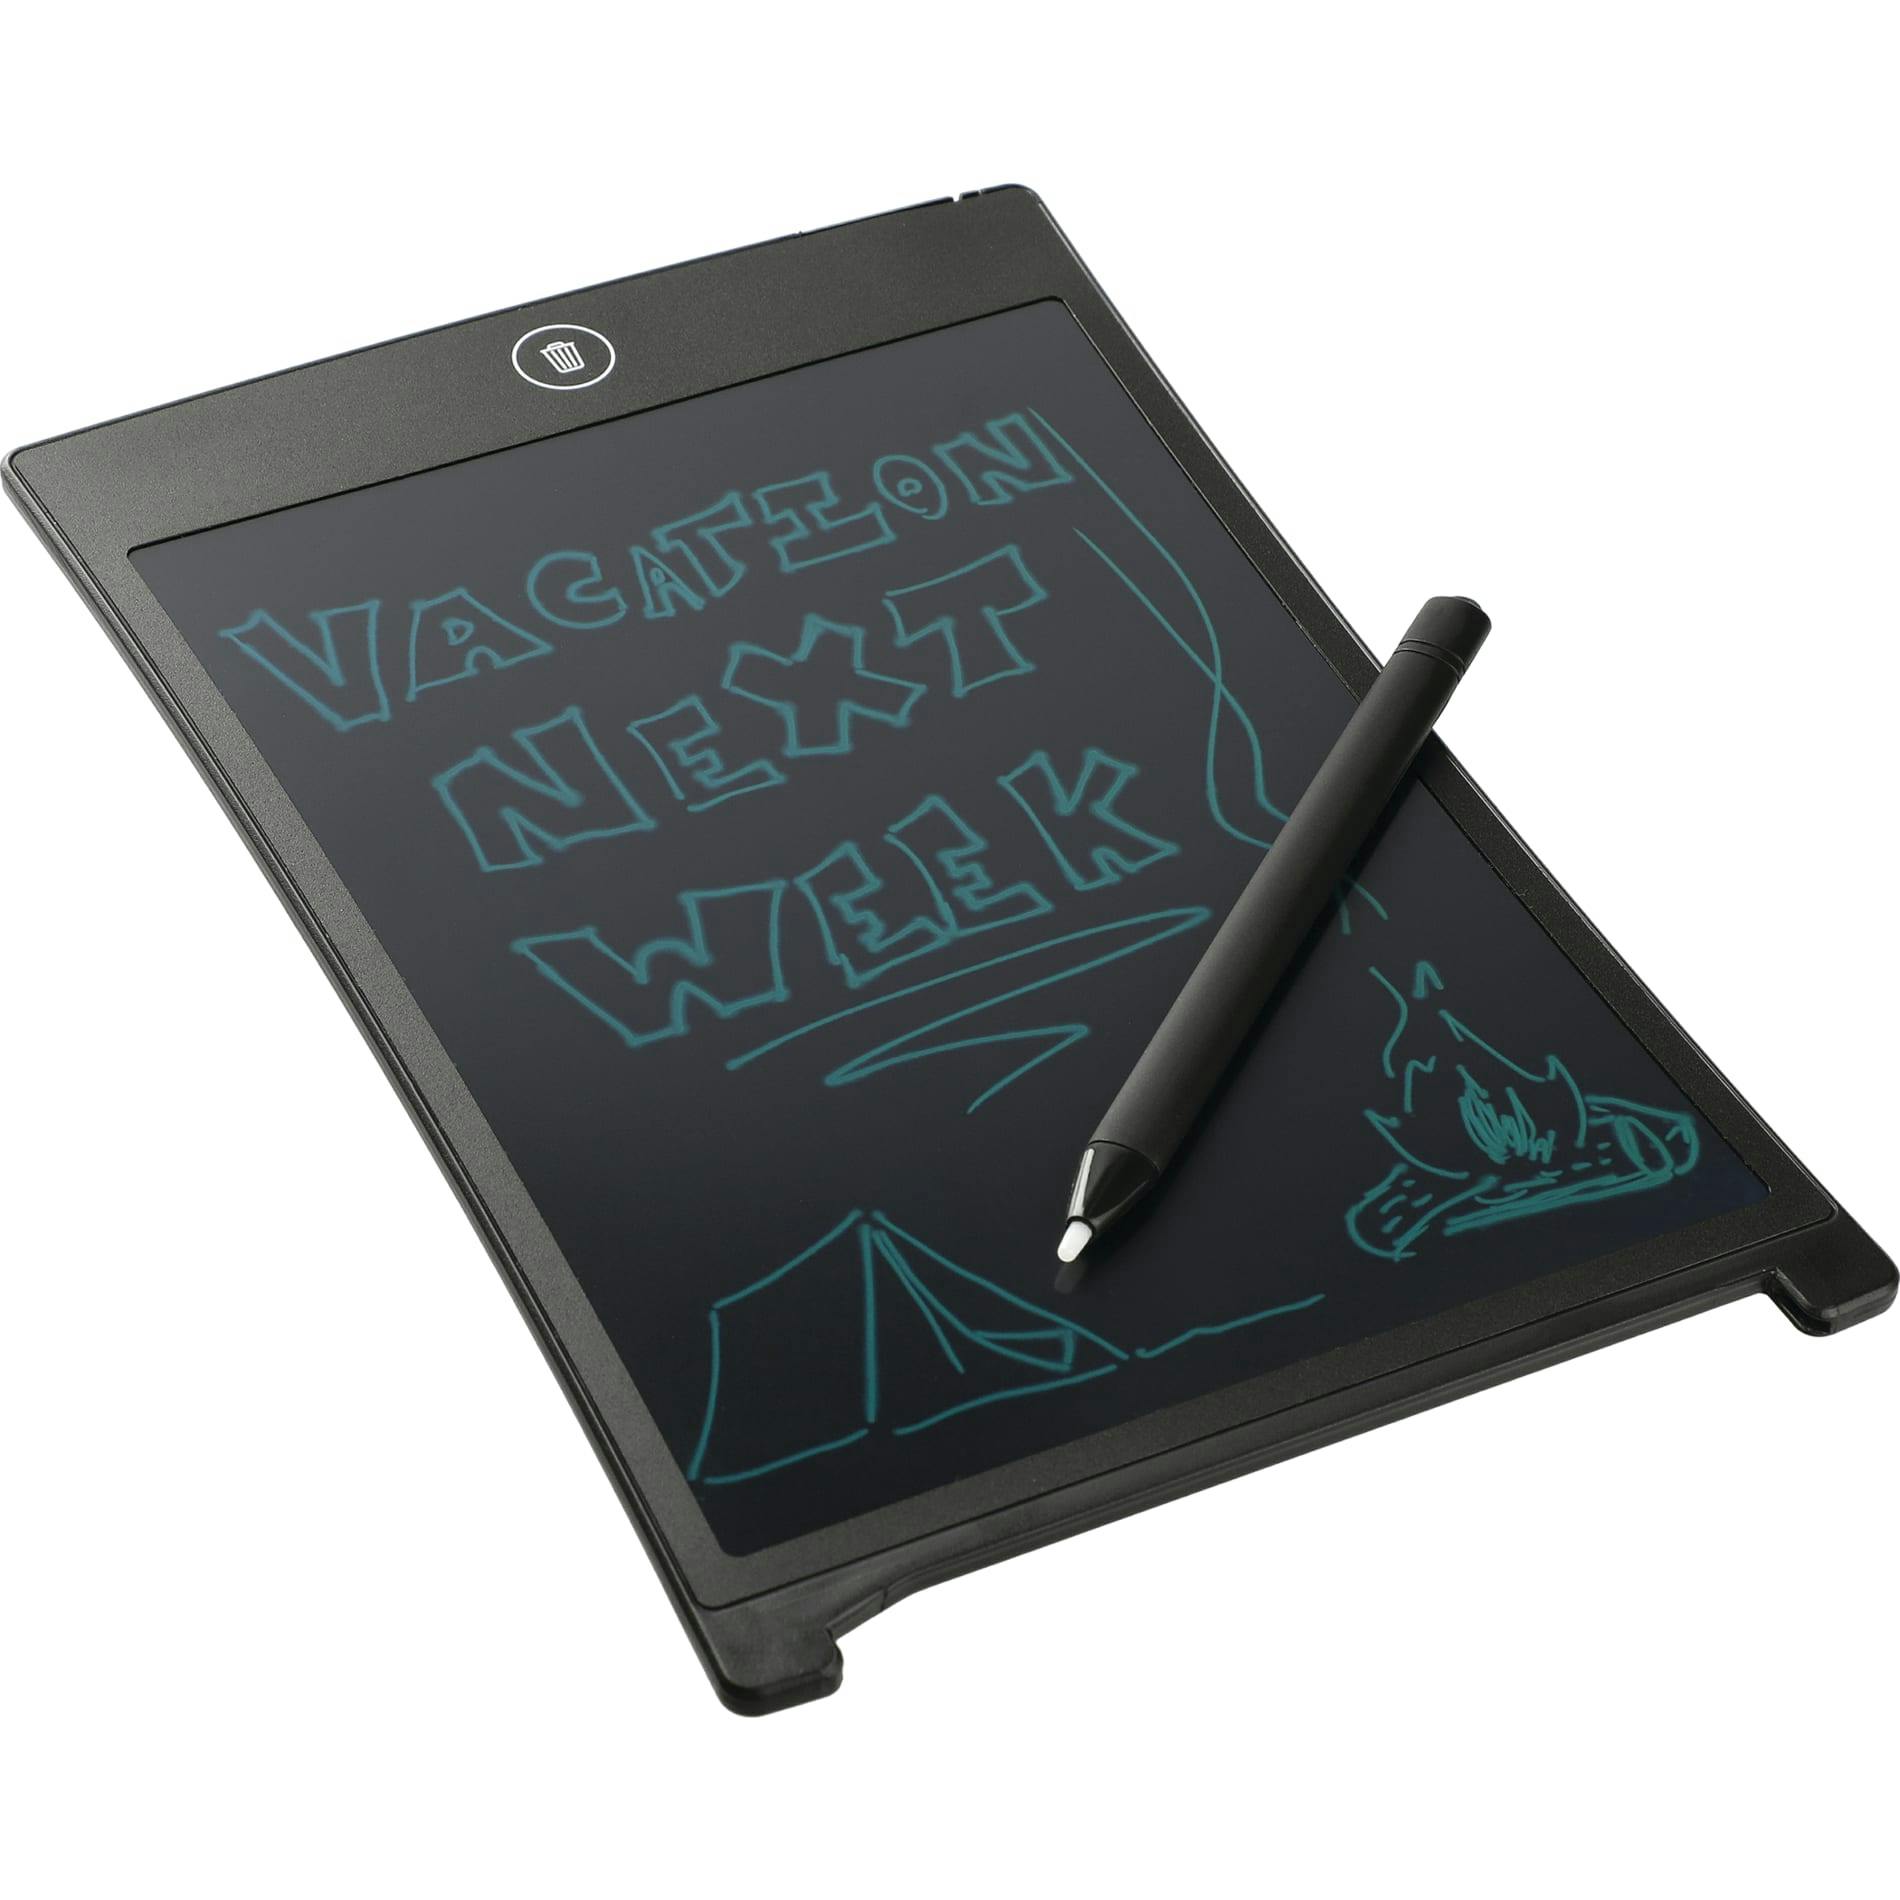 8.5" LCD e-Writing & Drawing Tablet - additional Image 1